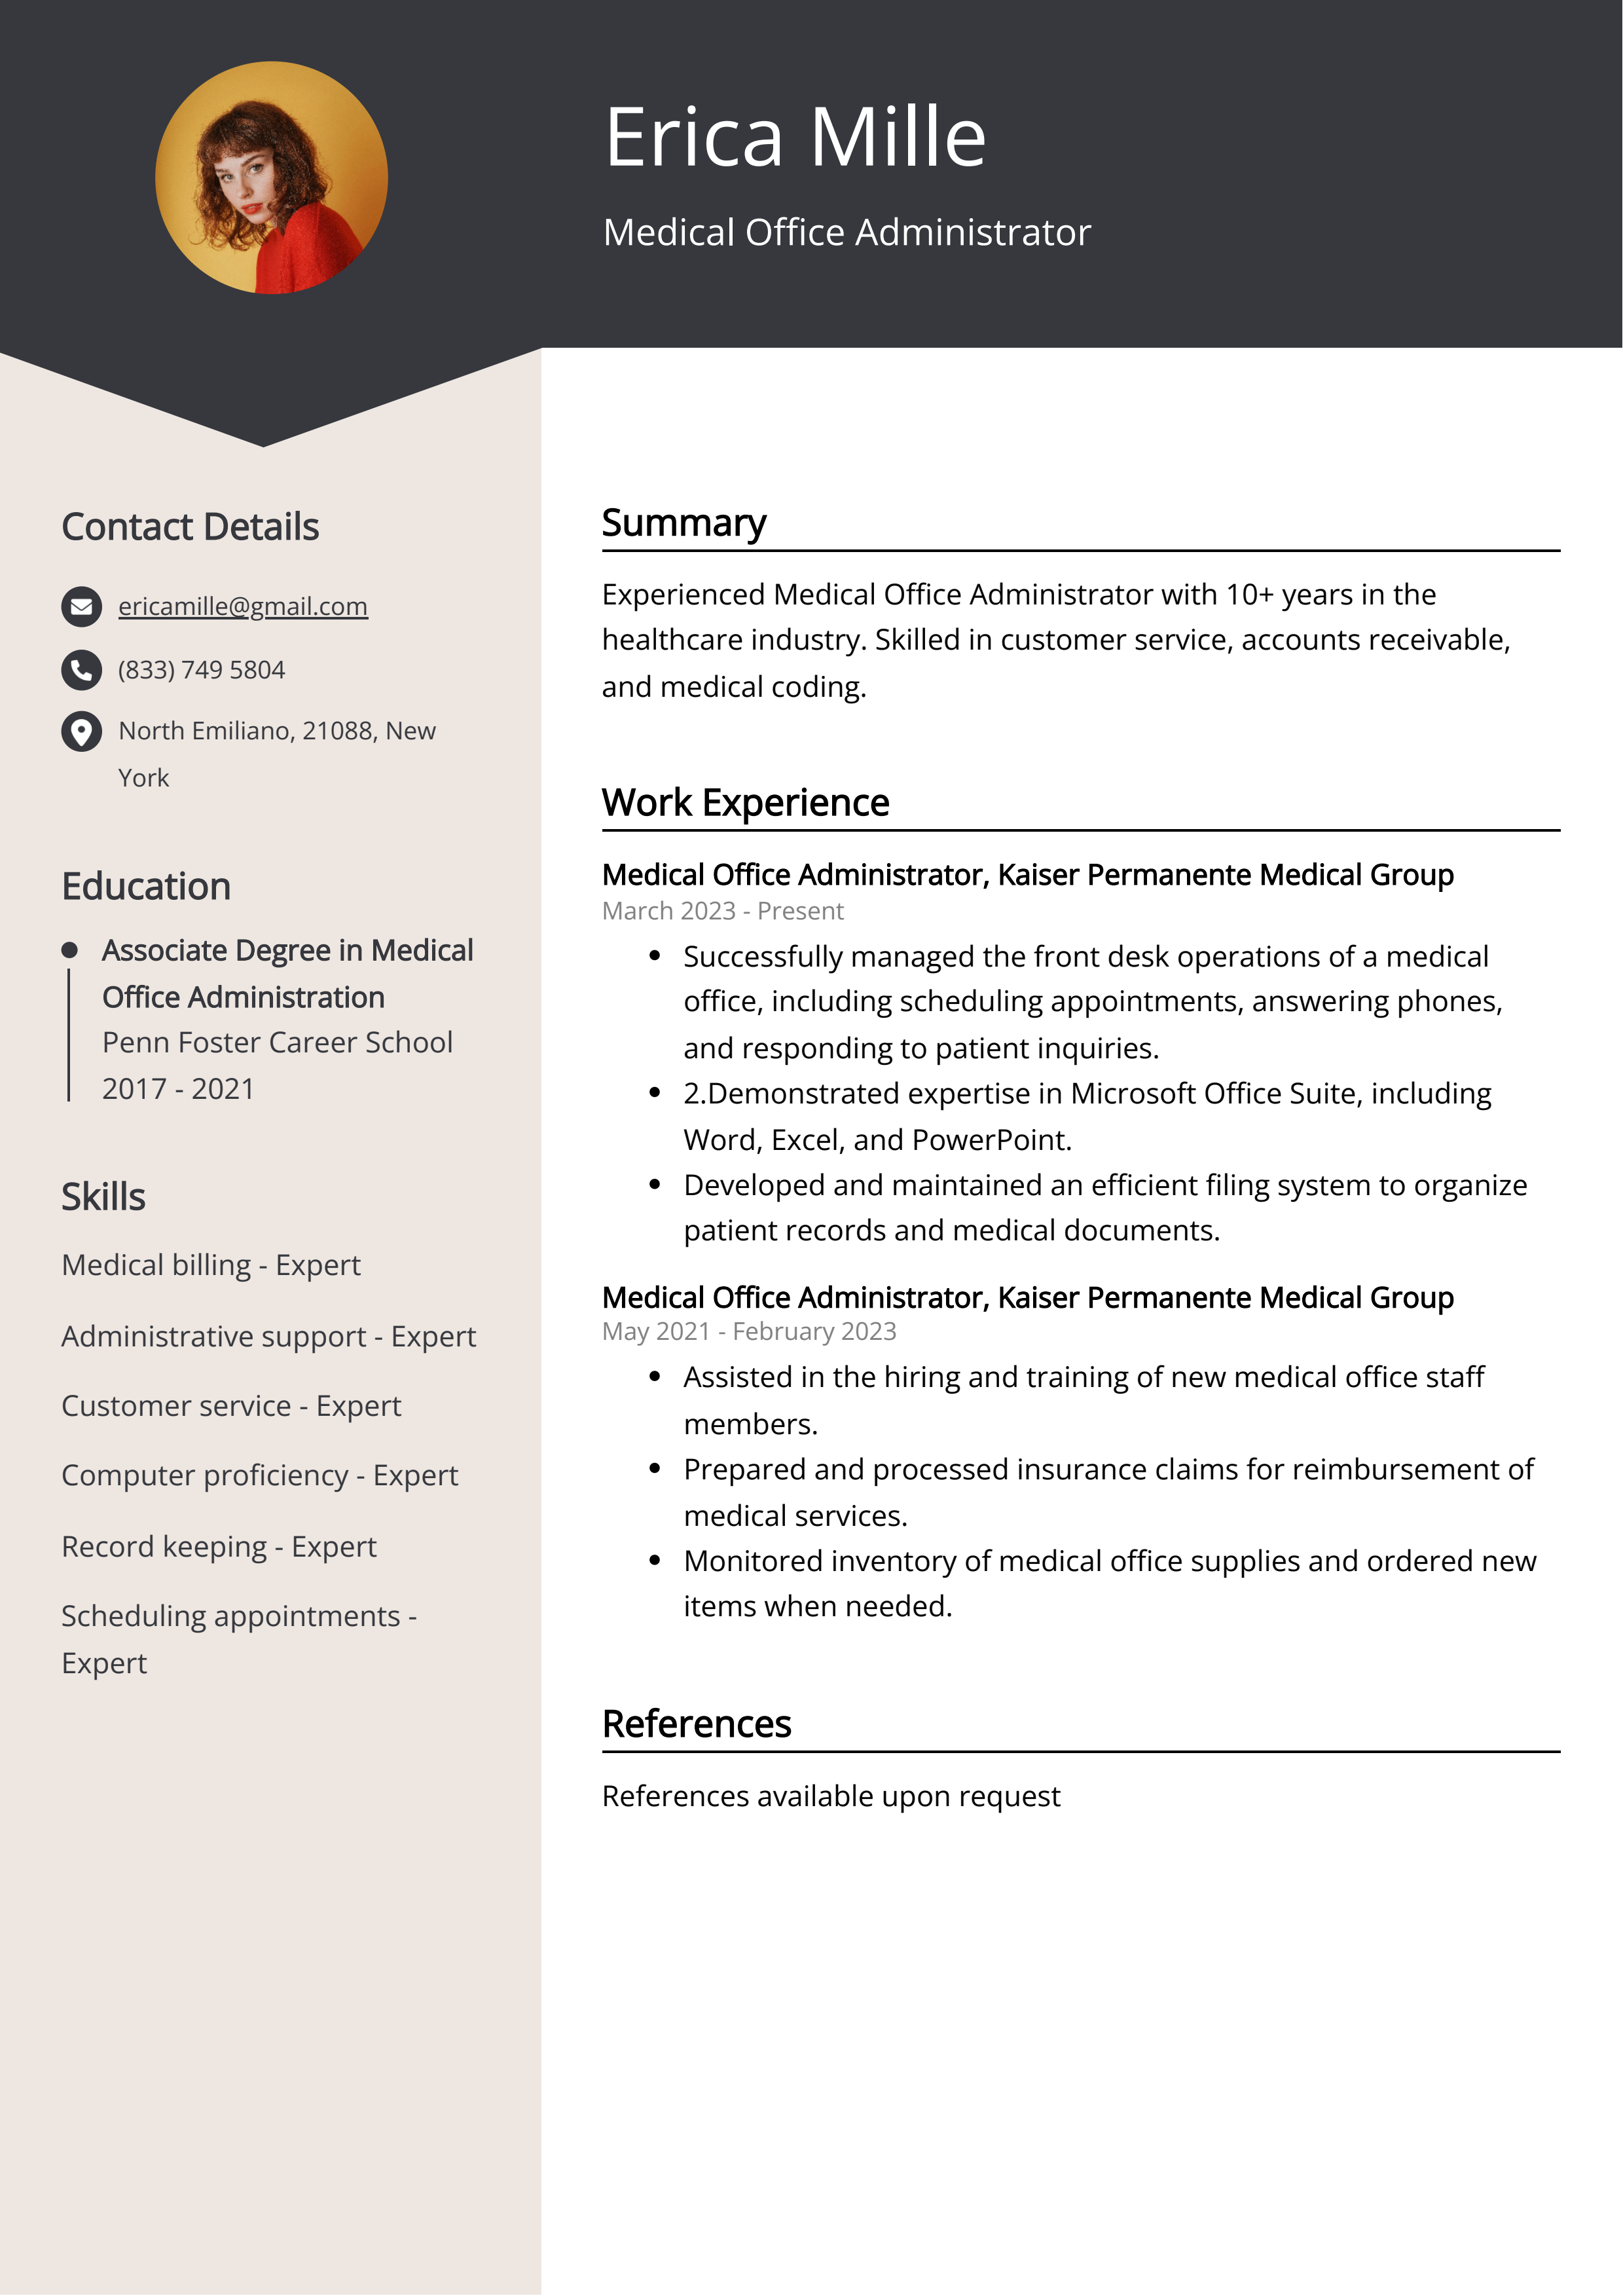 Medical Office Administrator CV Example